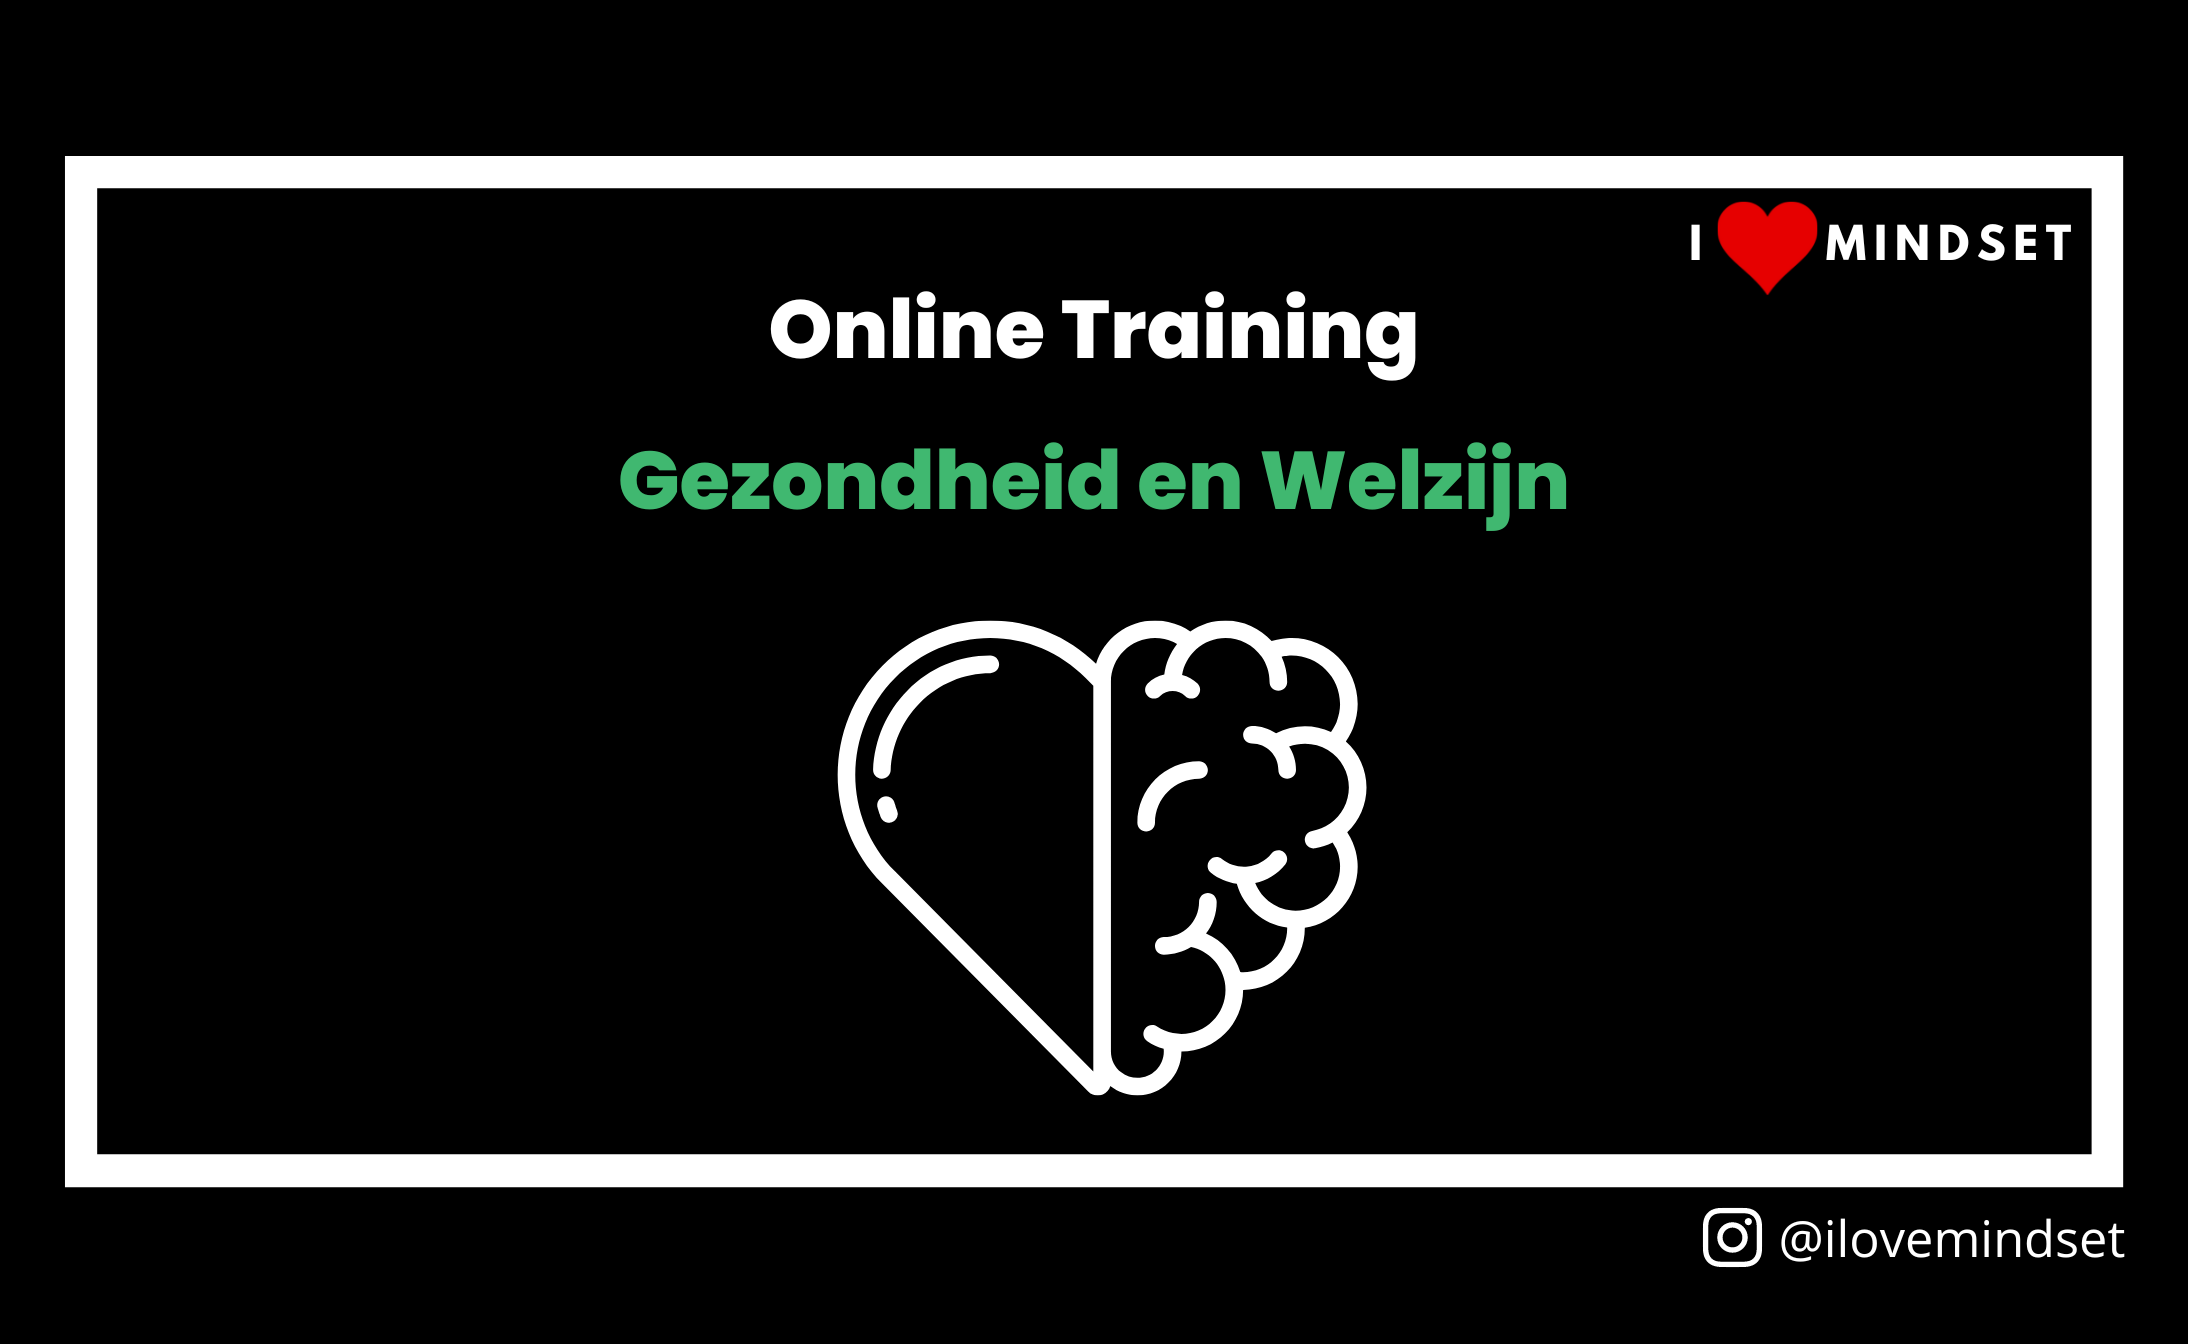 Online Training- Health and Wellness (coming soon!)